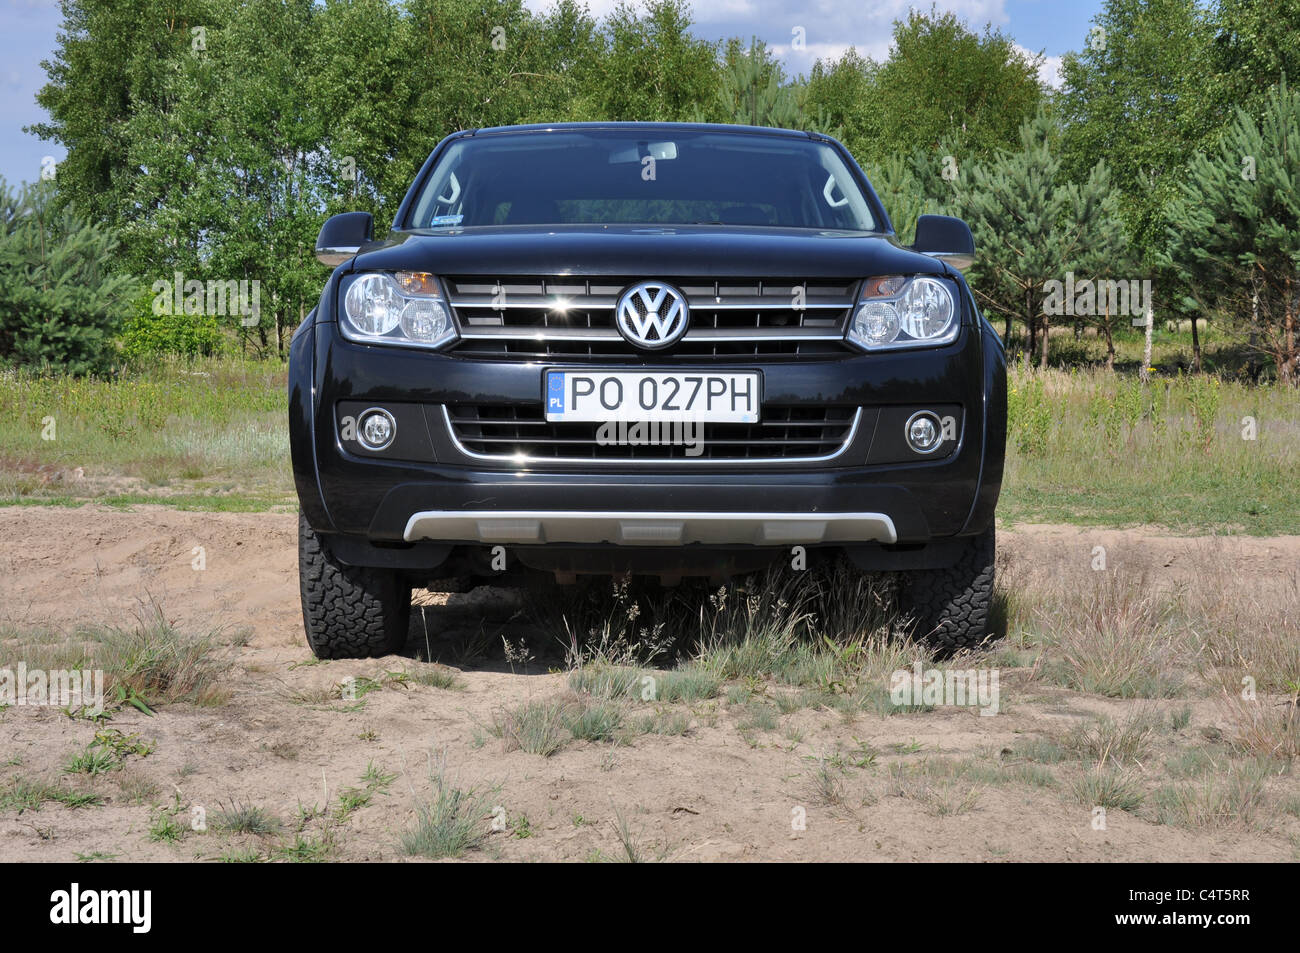 Volkswagen Amarok 2.0 BiTDI 4Motion - MY 2011 - Double Cab - German pick-up - forest, meadow Stock Photo